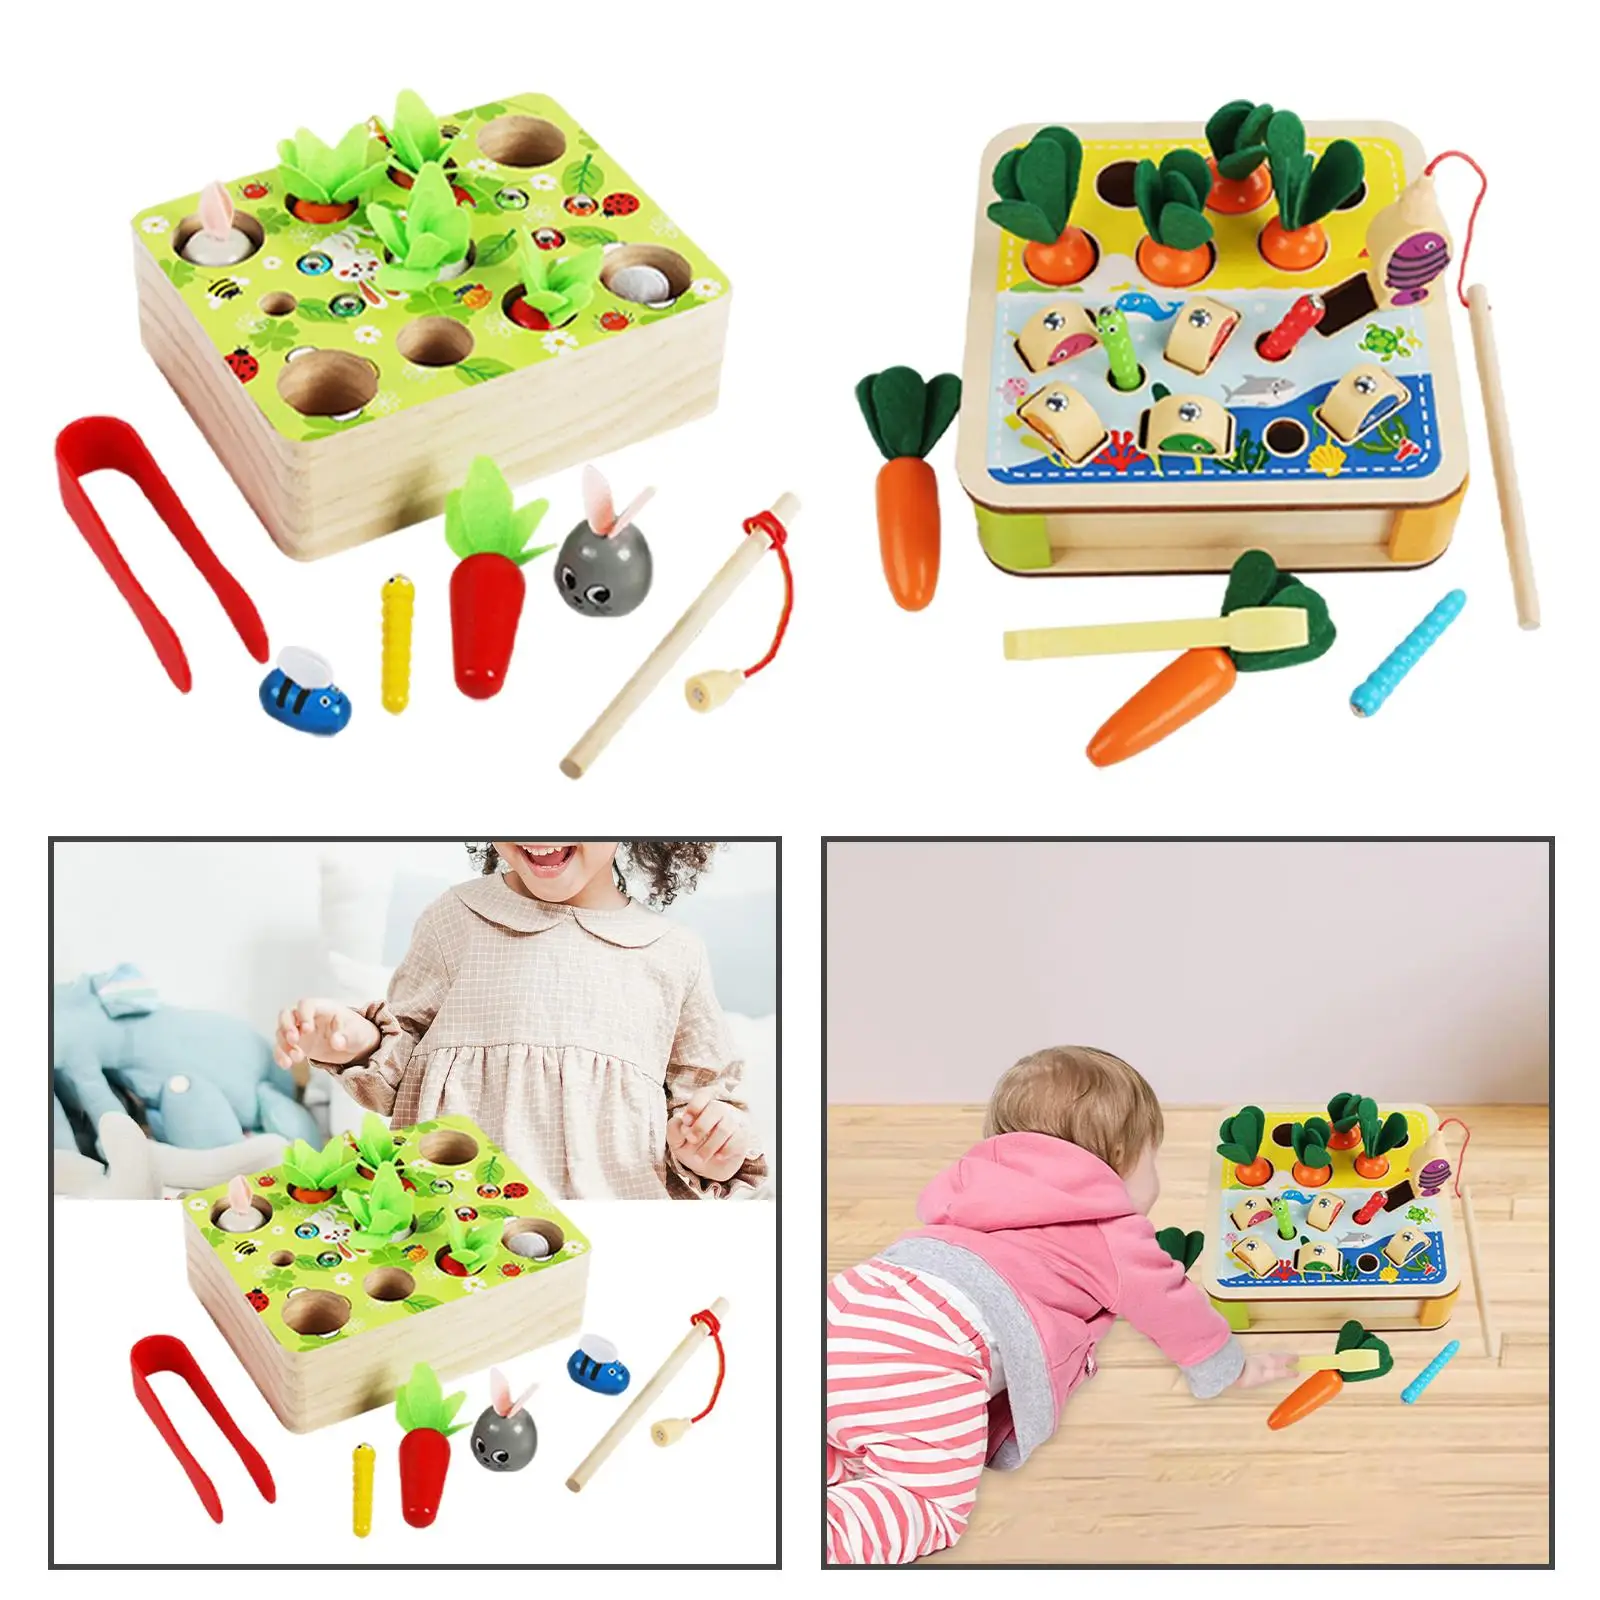 Wooden Pulling Carrot Toy Parent Child Game Fishing Game Early Educational Toys for 3 4 5 6 Children Baby Holiday Gifts